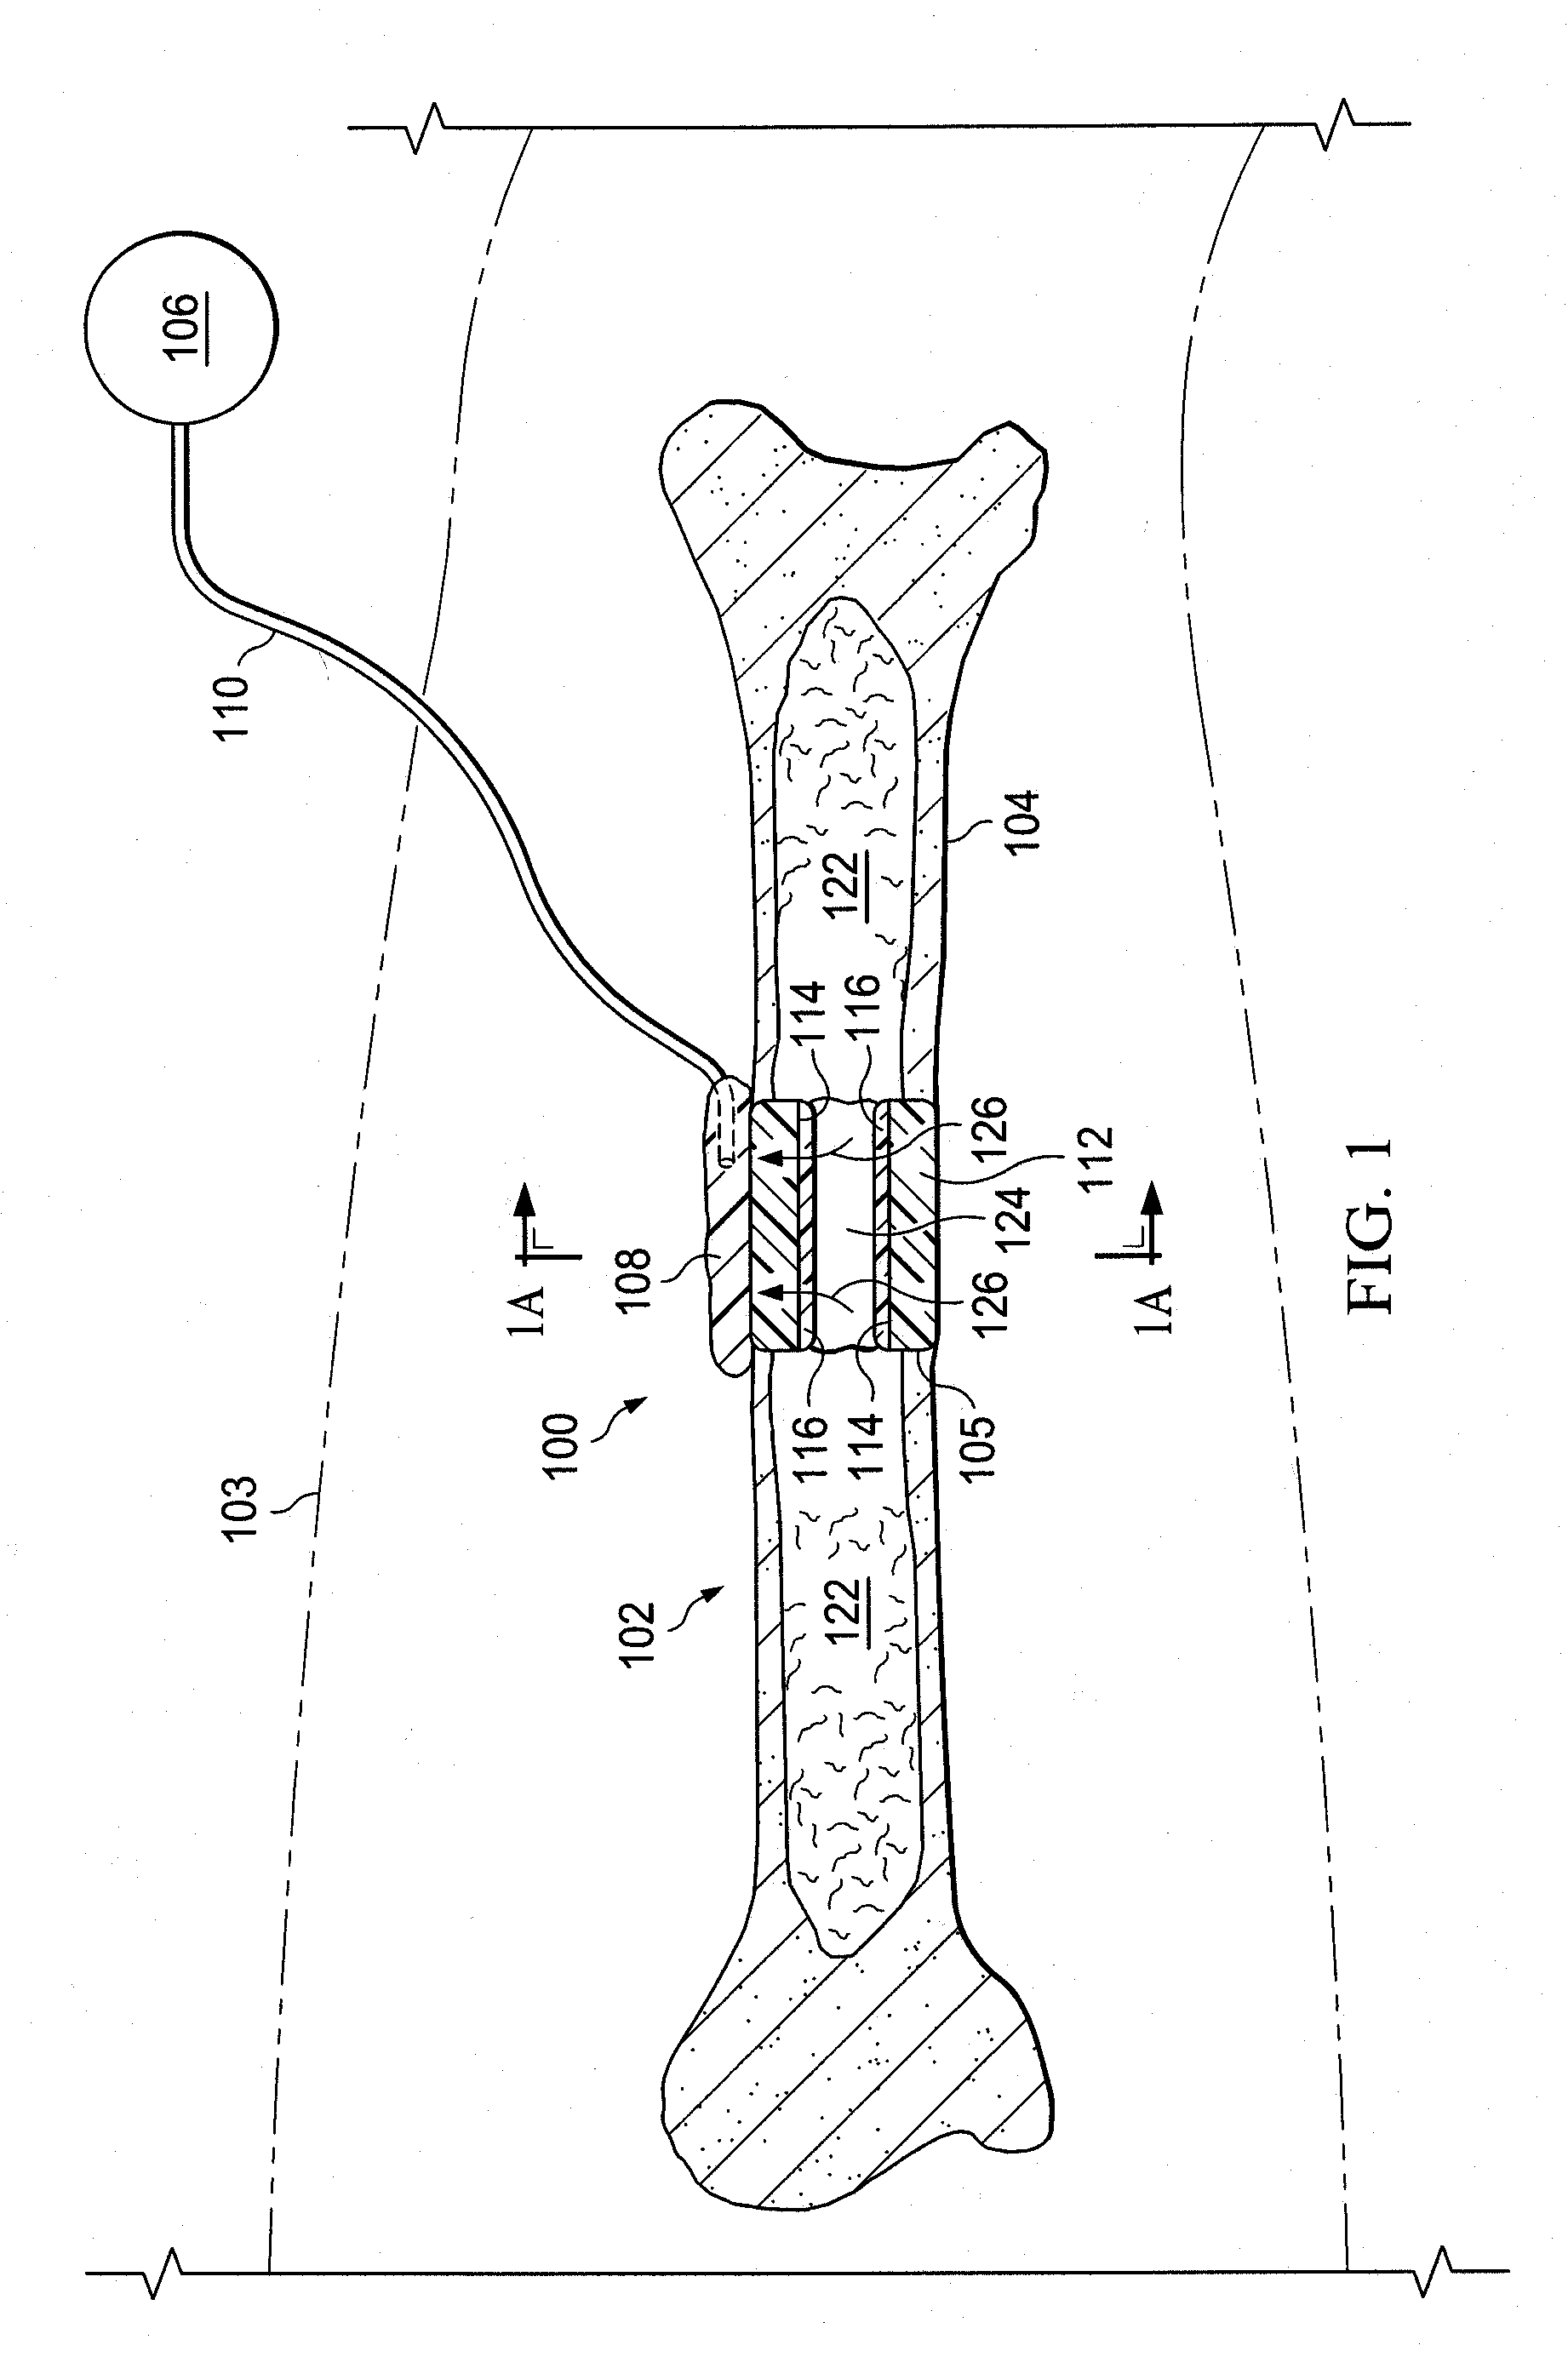 Systems for providing fluid flow to tissues